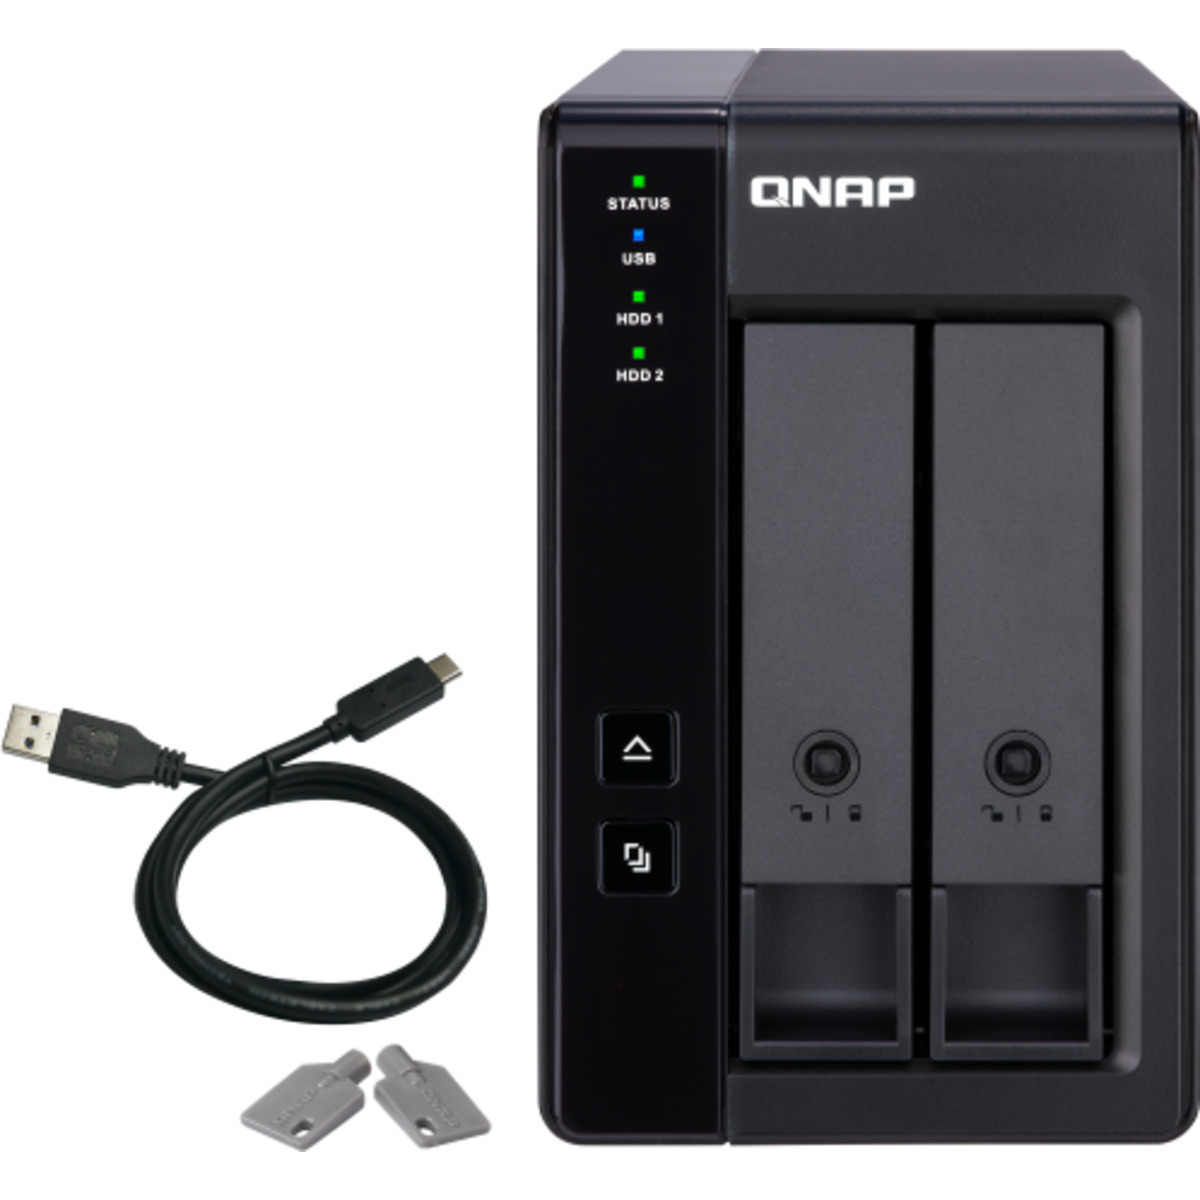 QNAP TR-002 External Expansion Drive 36tb 2-Bay Desktop Multimedia / Power User / Business Expansion Enclosure 2x18tb Western Digital Red Pro WD181KFGX 3.5 7200rpm SATA 6Gb/s HDD NAS Class Drives Installed - Burn-In Tested TR-002 External Expansion Drive